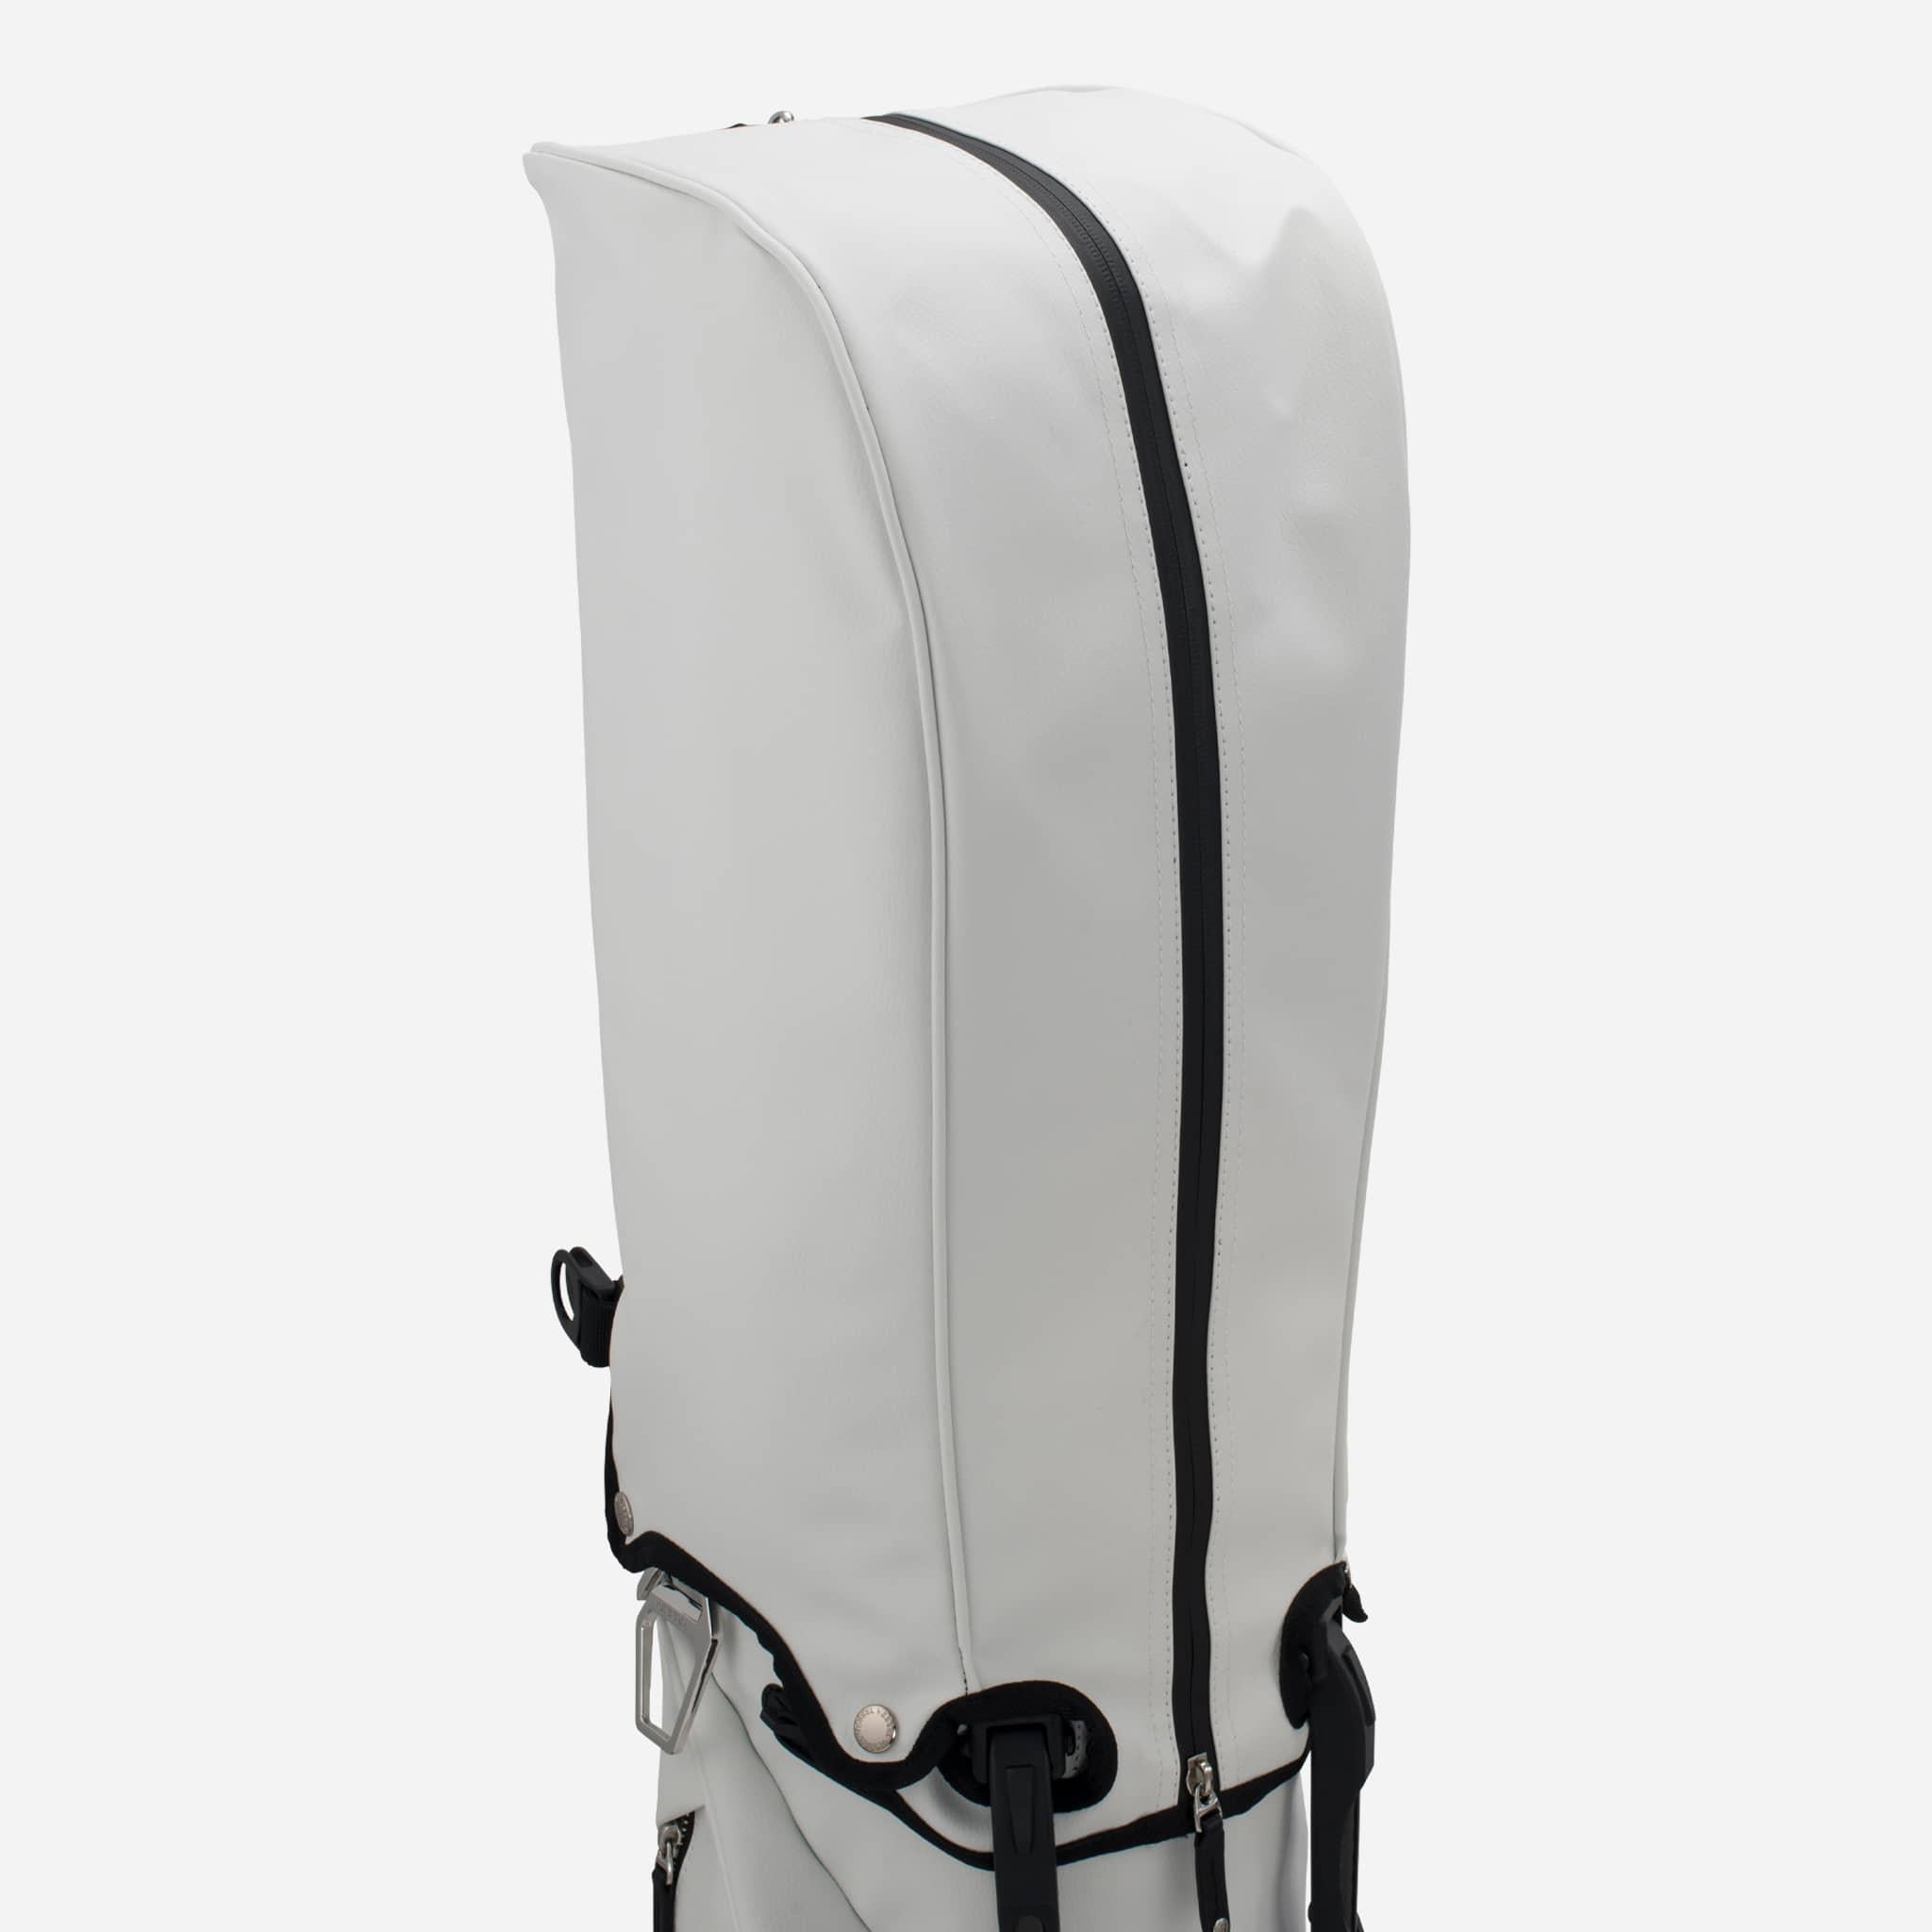 Vessel VLS Lux Golf Stand Bag Pebbled White Very Good